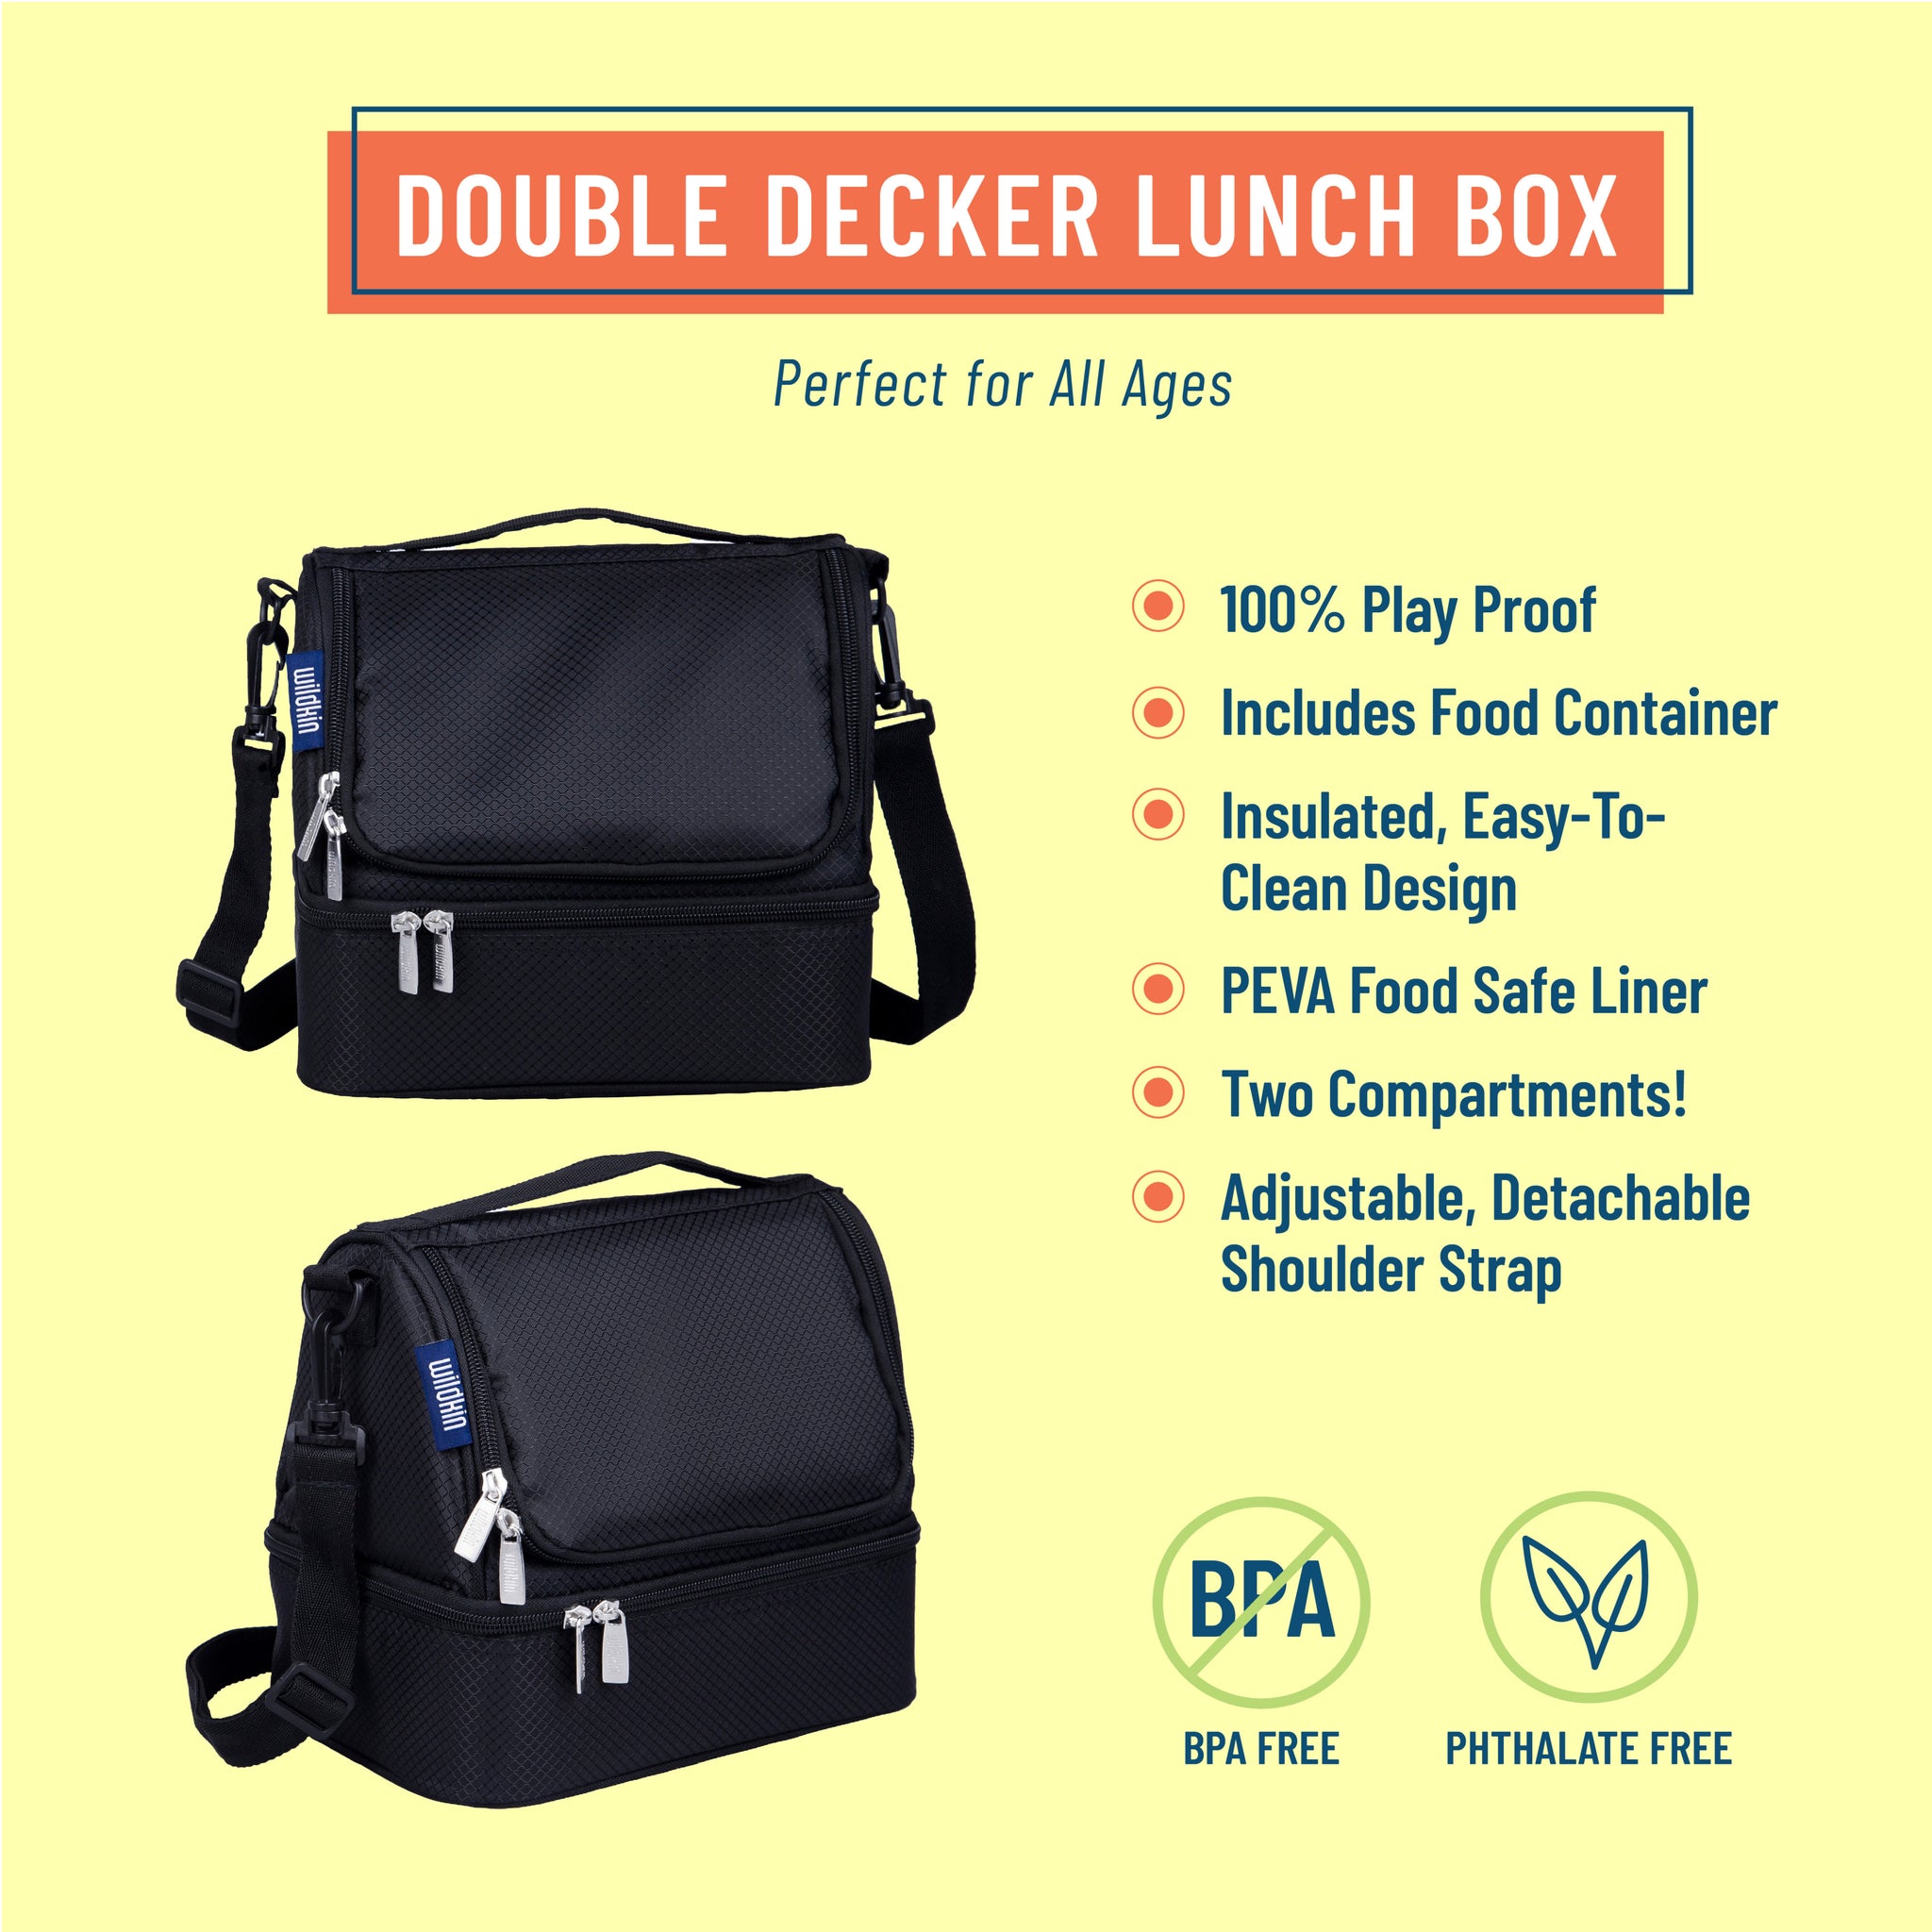 Use an Insulated Lunch Bag to Keep Meals Safe